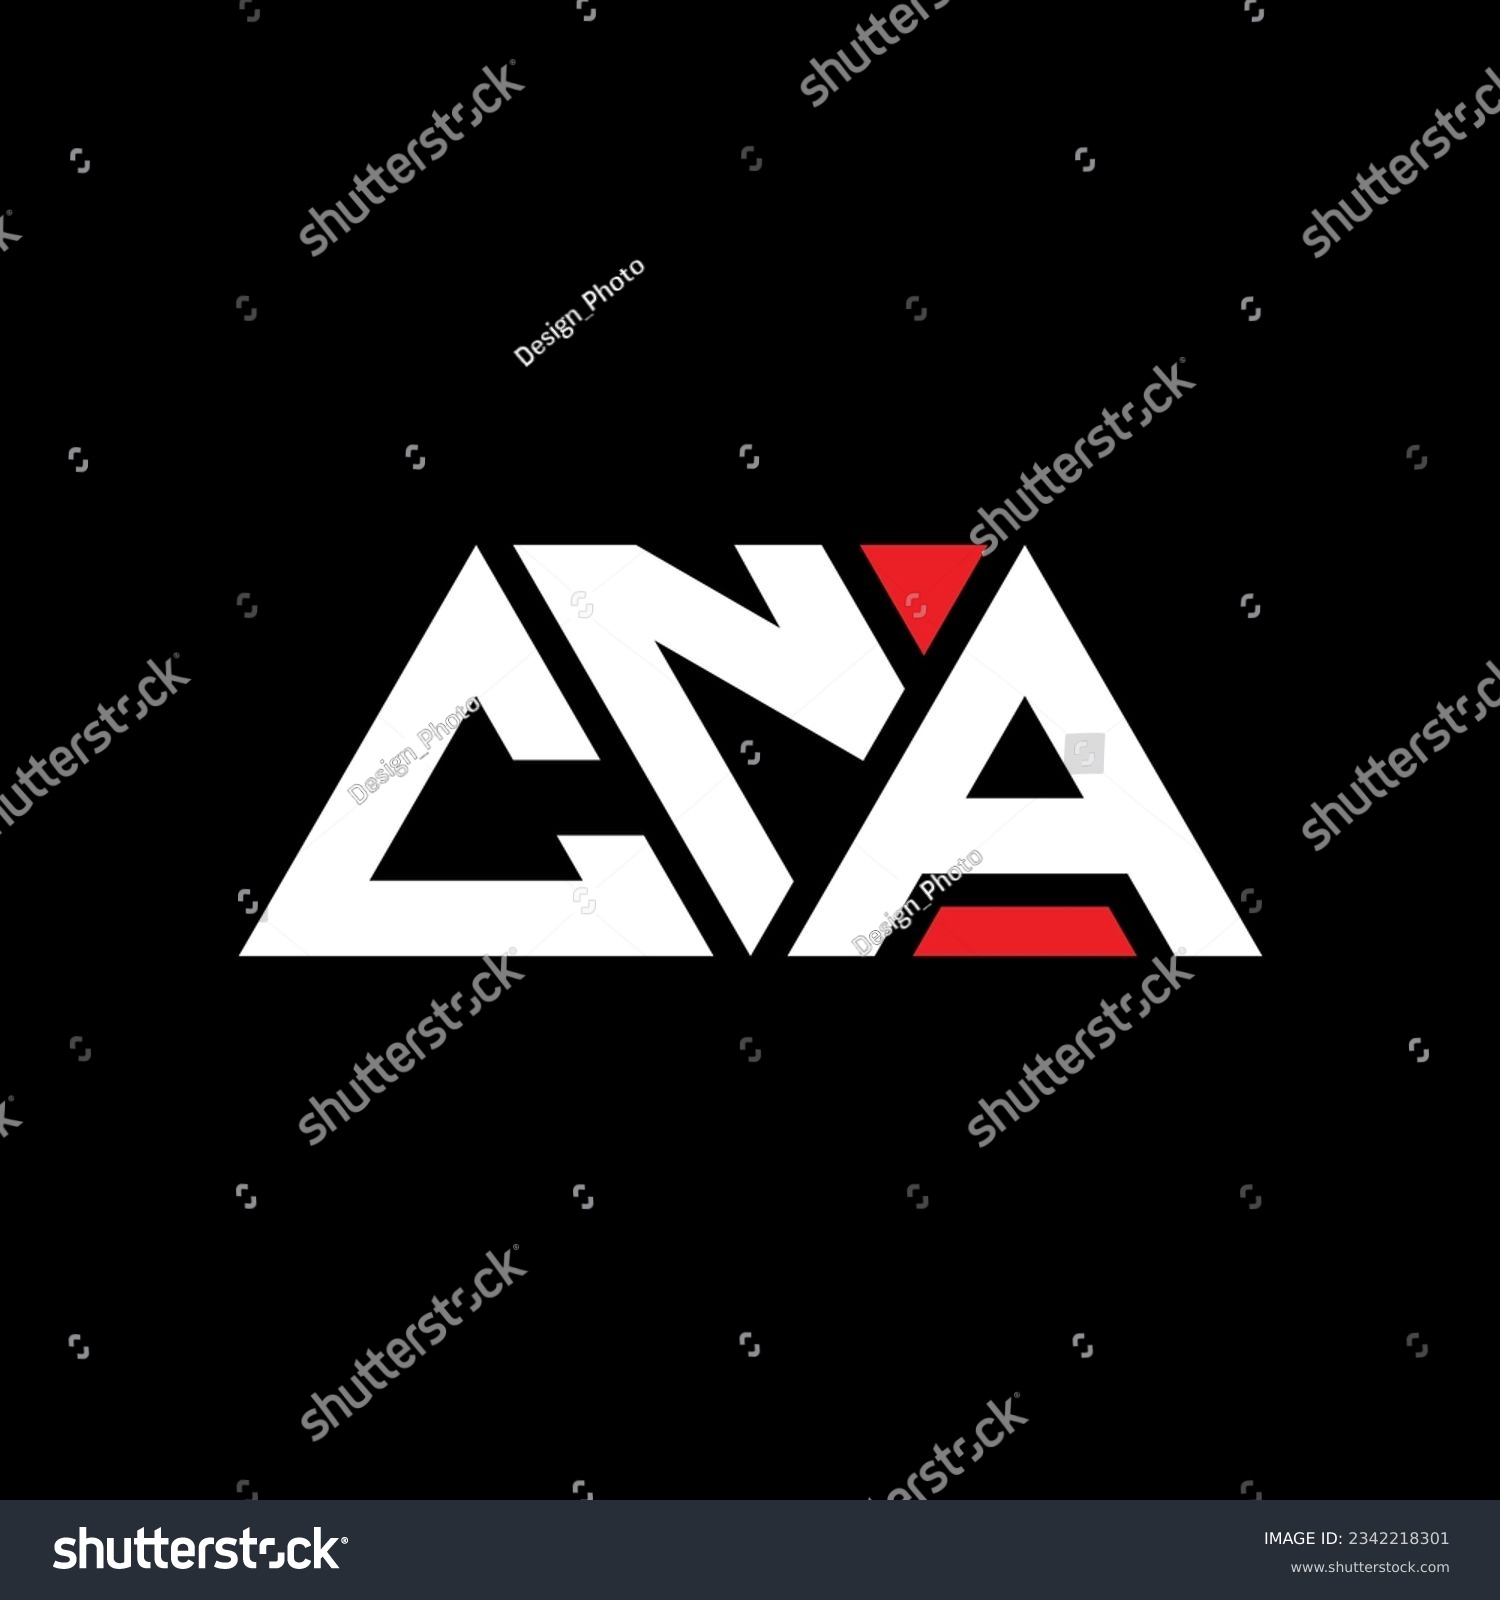 SVG of CNA triangle letter logo design with triangle shape. CNA triangle logo design monogram. CNA triangle vector logo template with red color. CNA triangular logo Simple, Elegant, and Luxurious design. svg